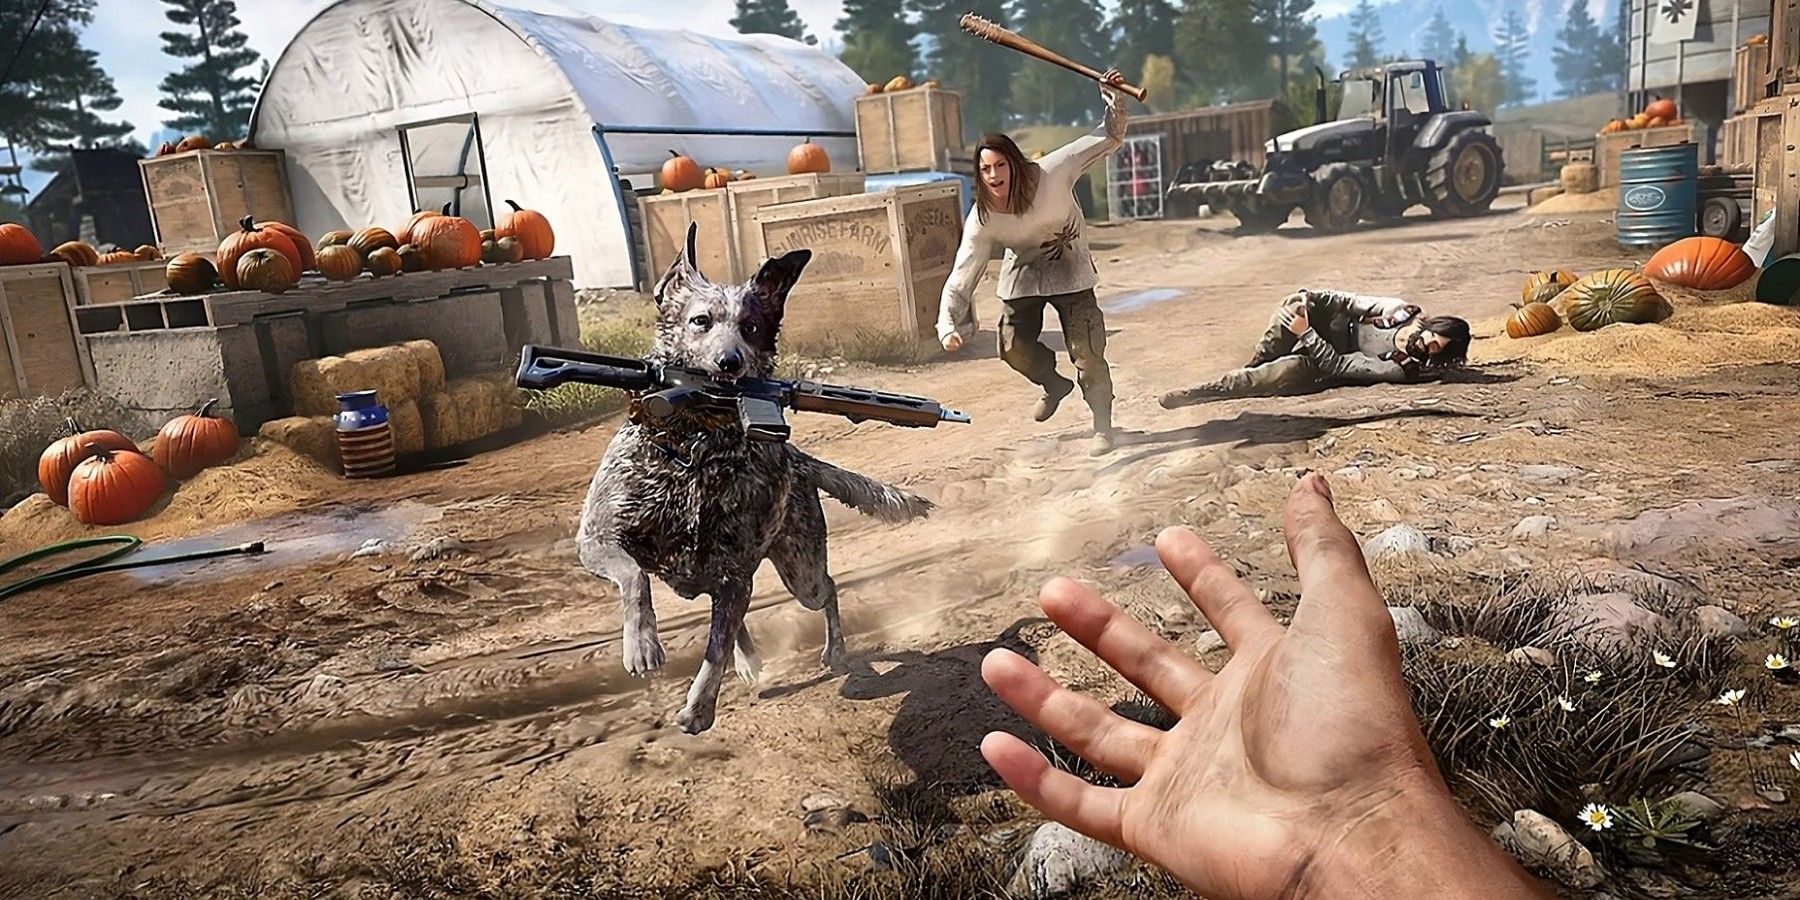 Does Far Cry 5 allow Crossplay?